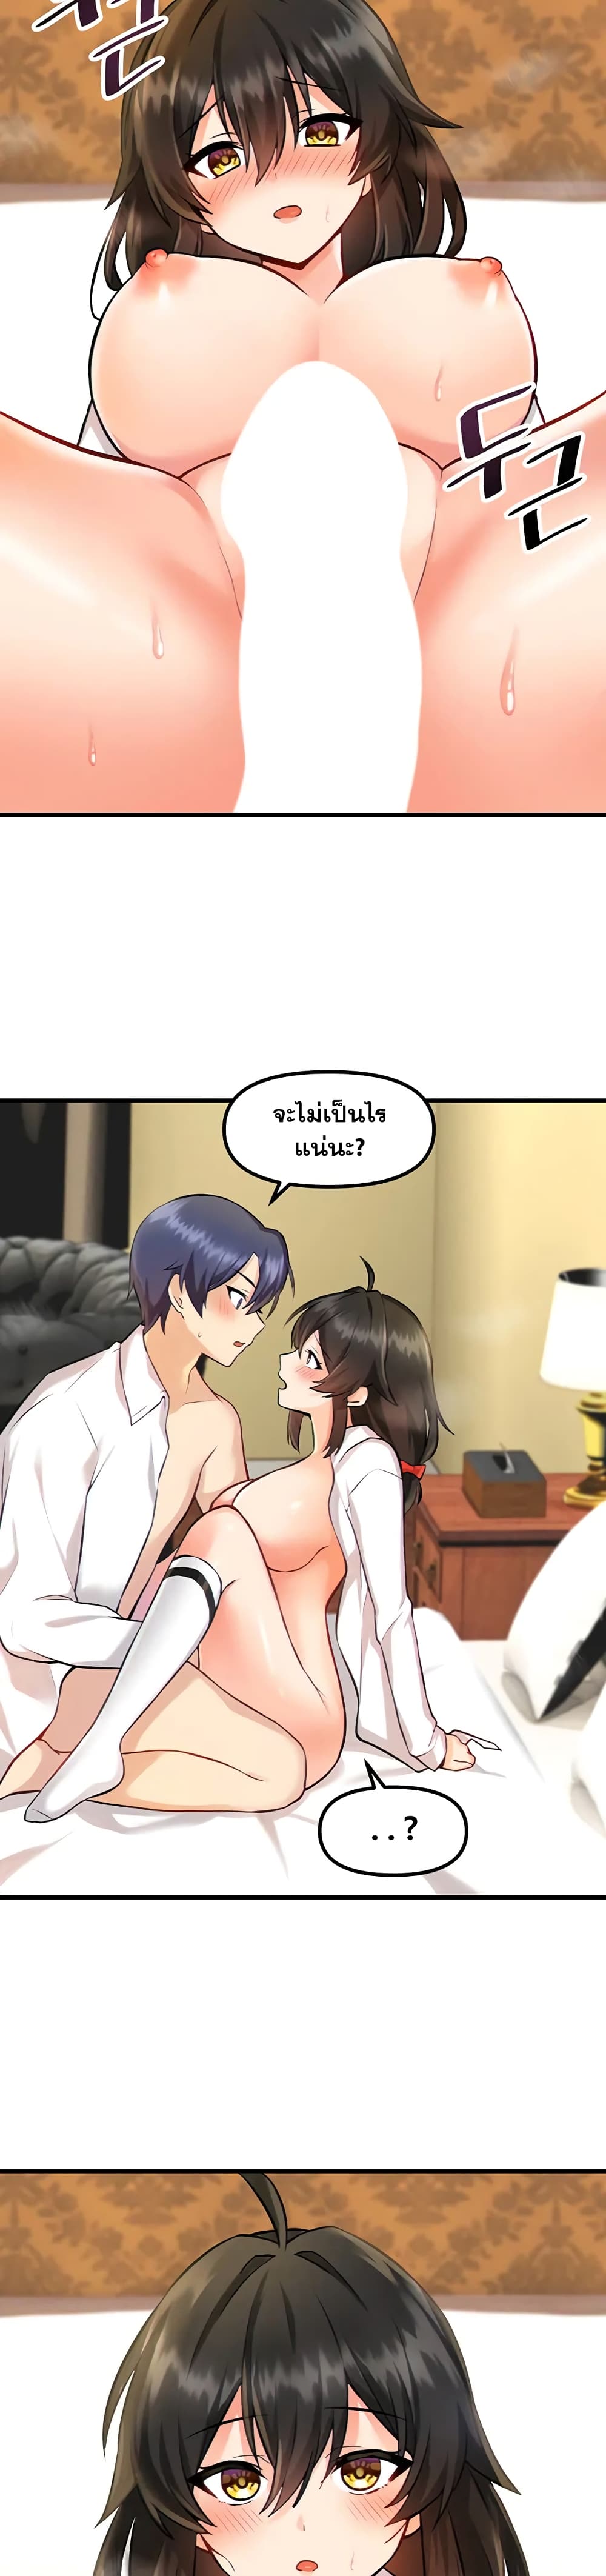 Trapped in the Academy’s Eroge 4-4